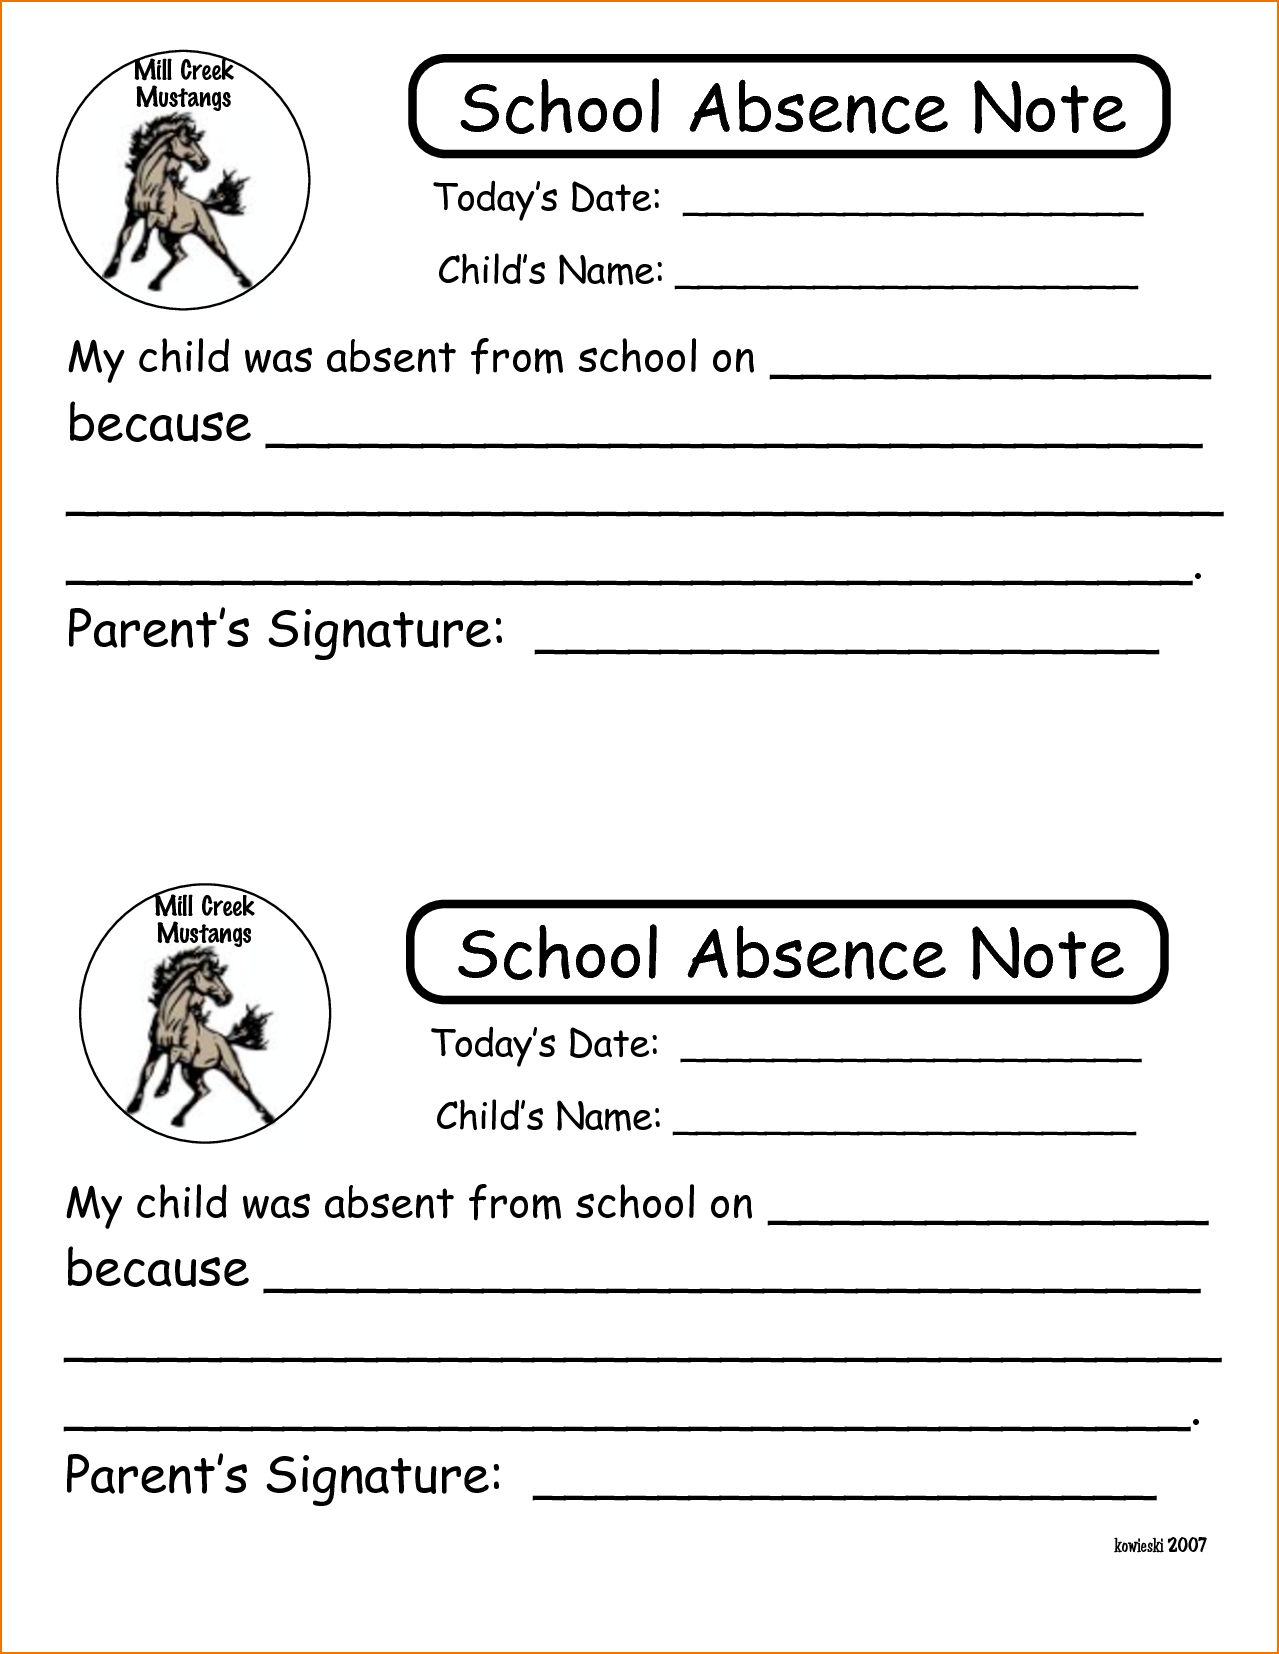 Doctors Note For School Absence.47519963.png   Sales Report Template